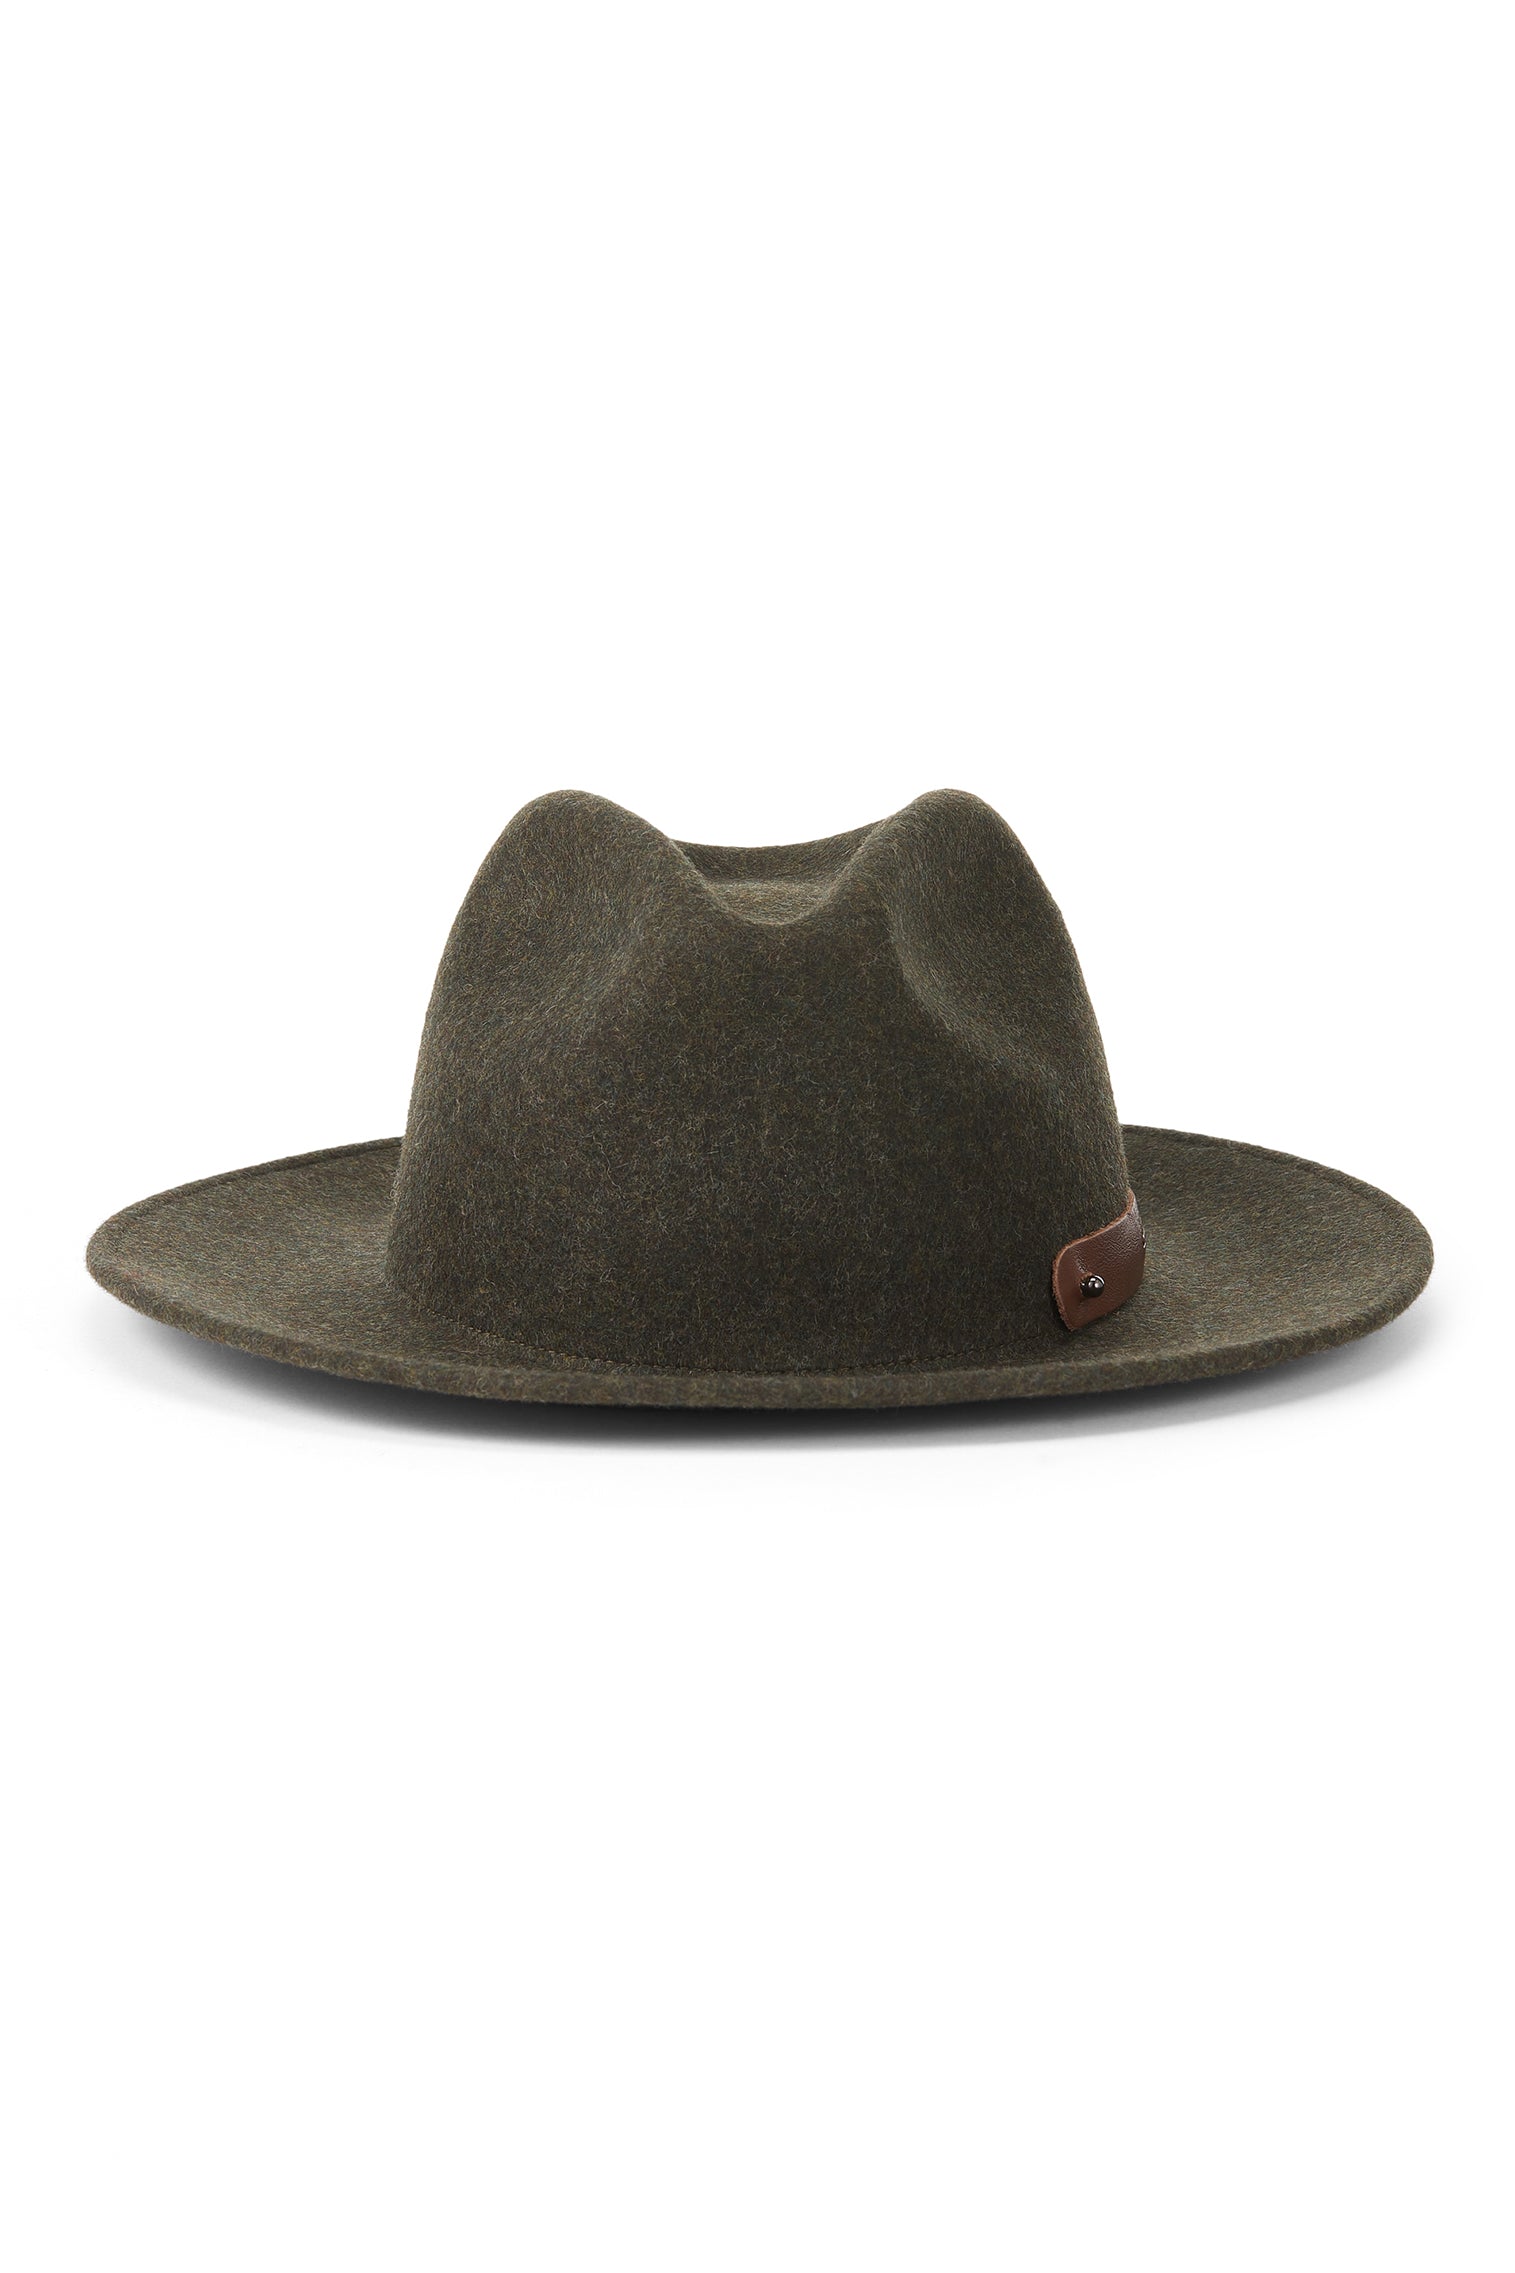 Cheltenham Rollable Trilby - Hats for Tall People - Lock & Co. Hatters London UK